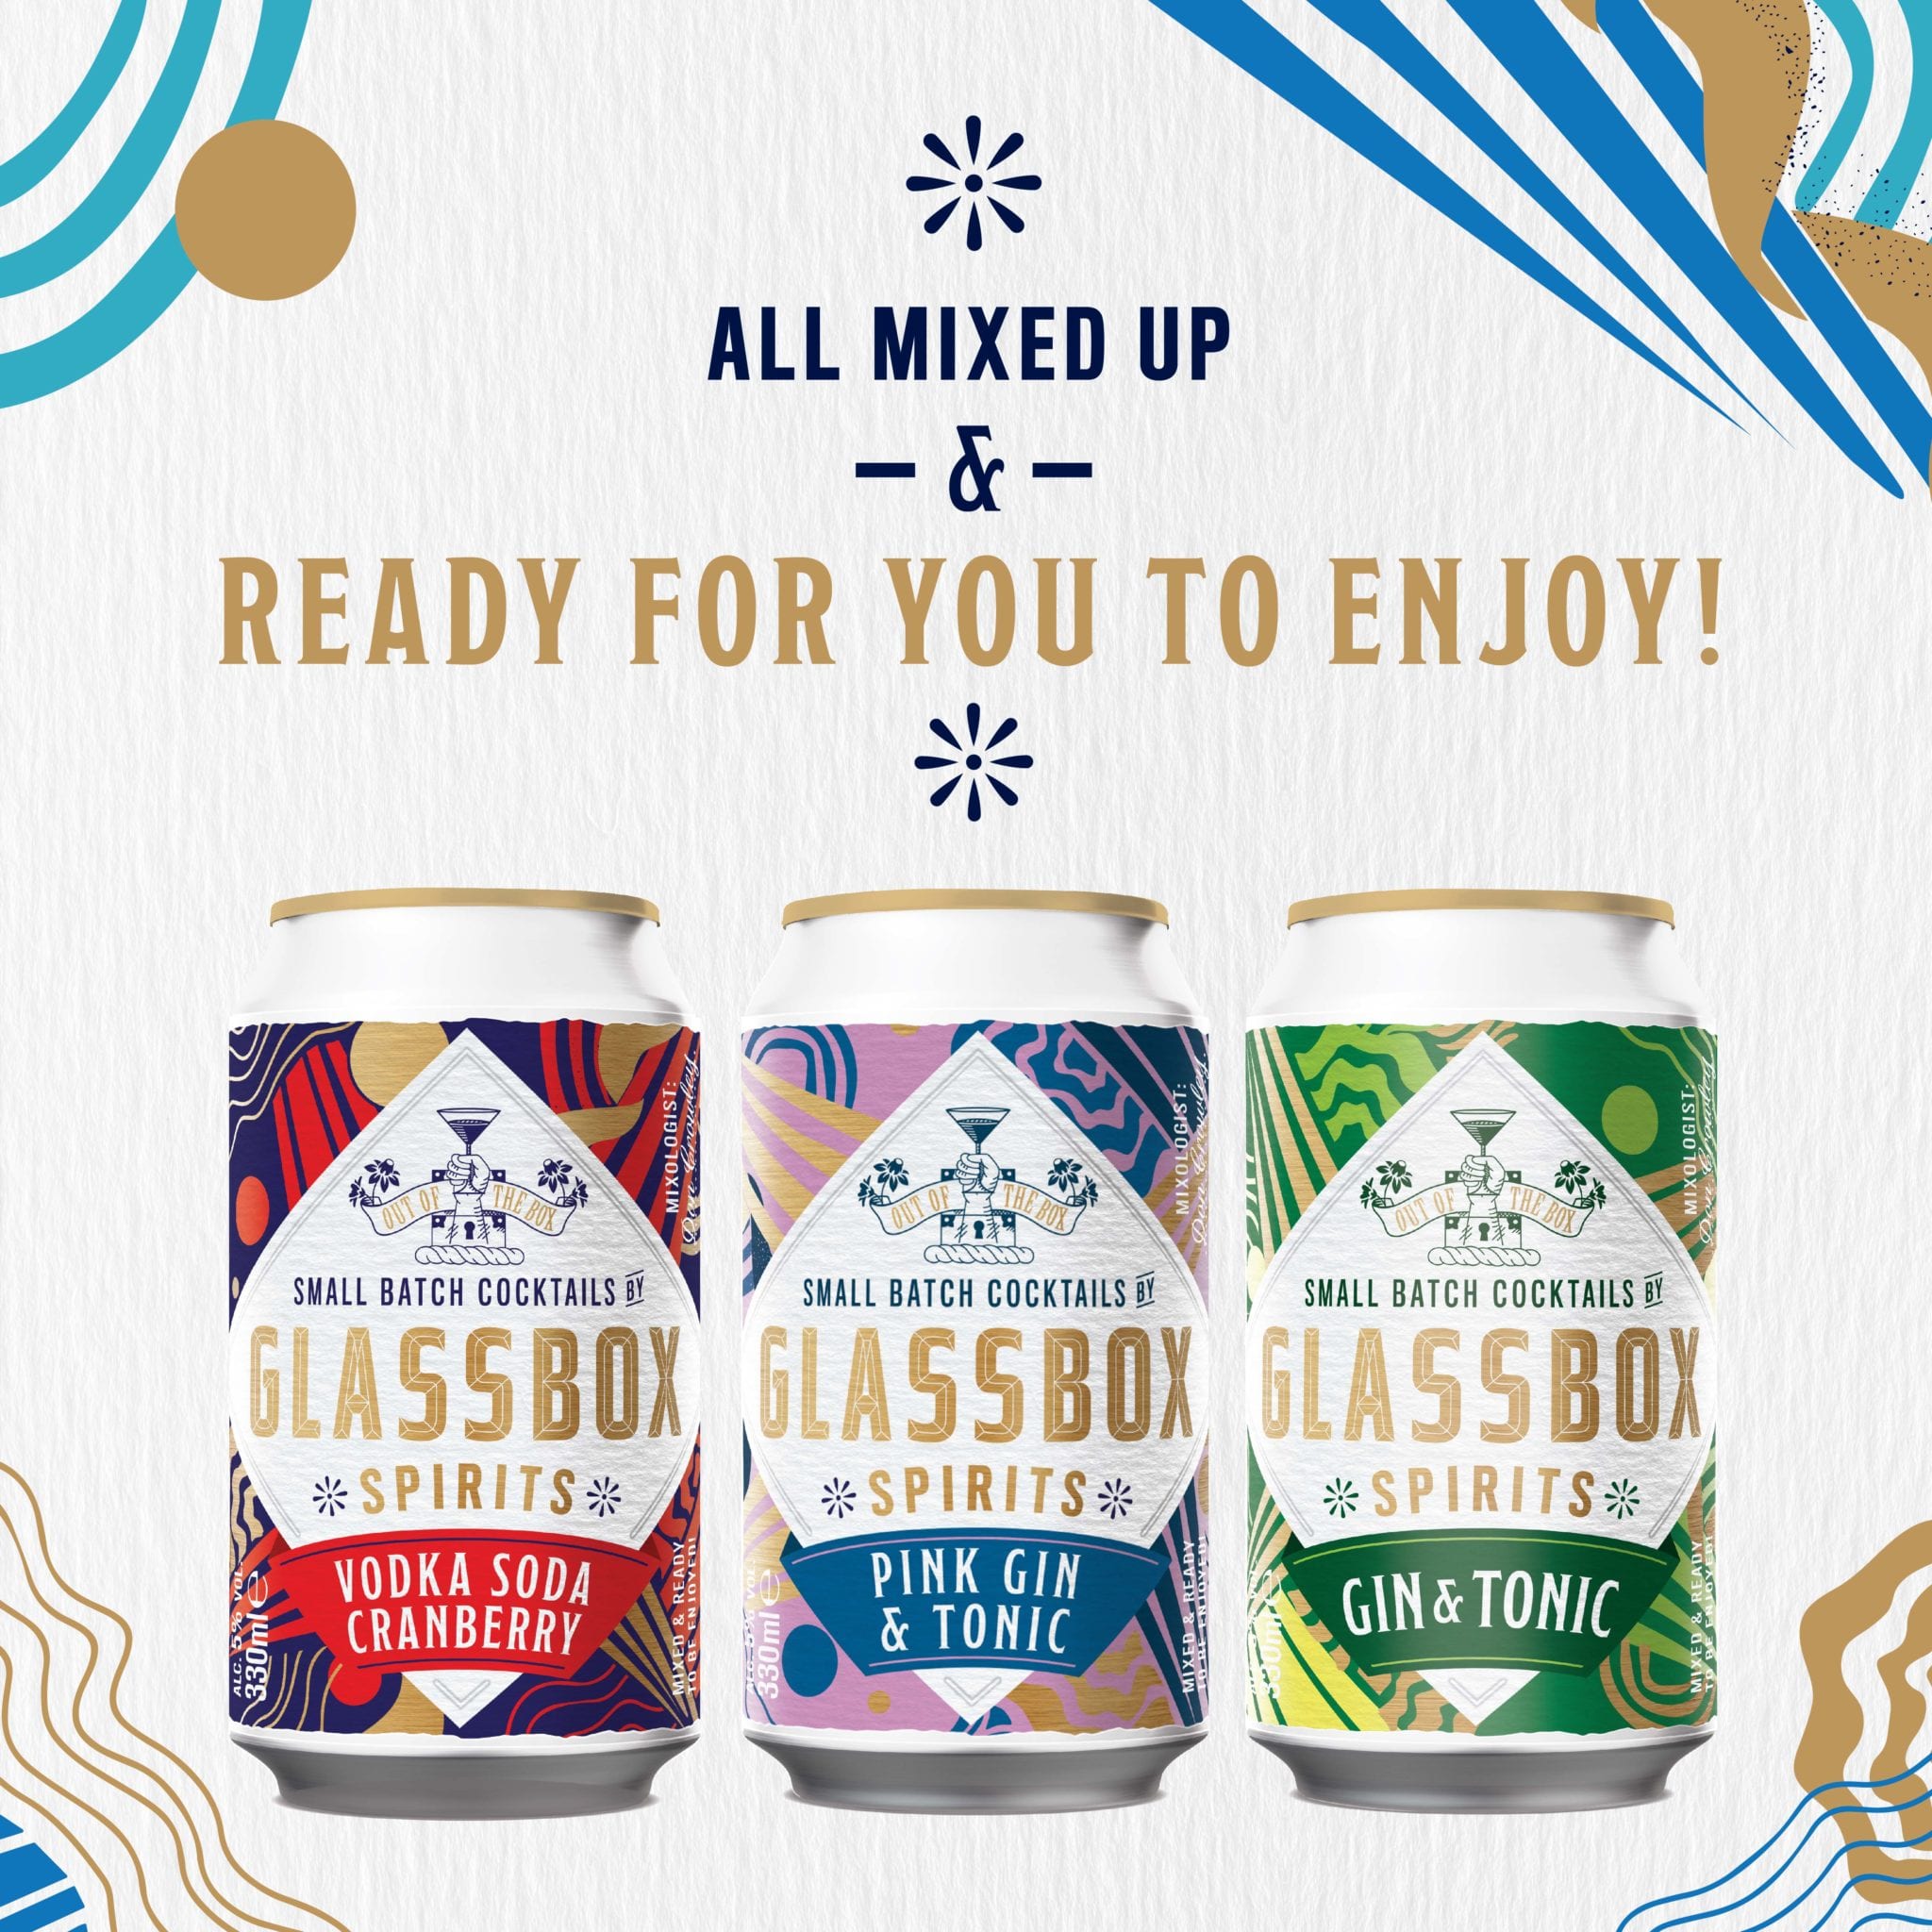 Mixed and ready to enjoy, the Glassbox Spirits range is perfect for summer events on the move such as festivals, concerts and picnics